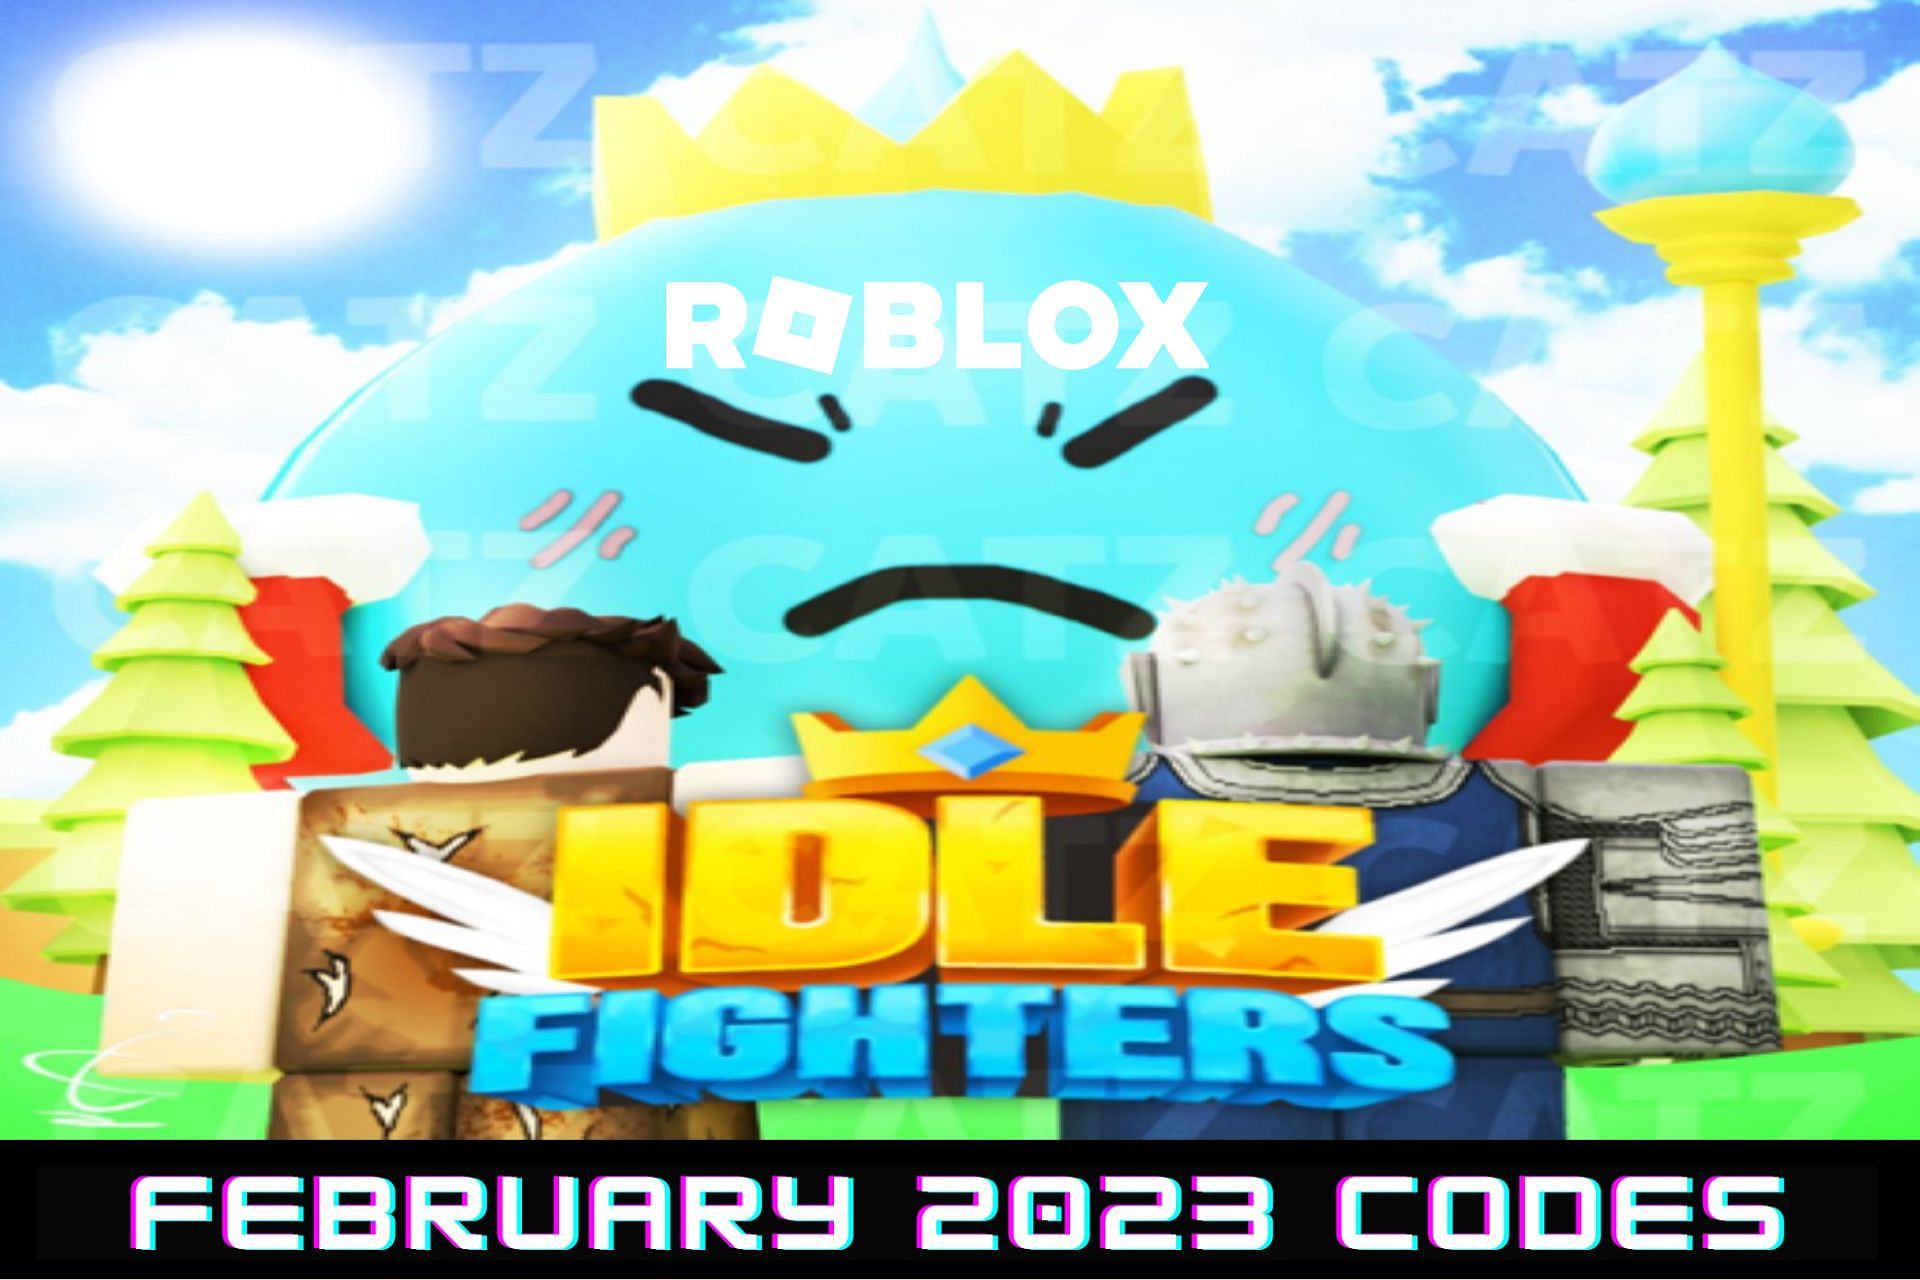 Roblox Idle Fighters Gameplay